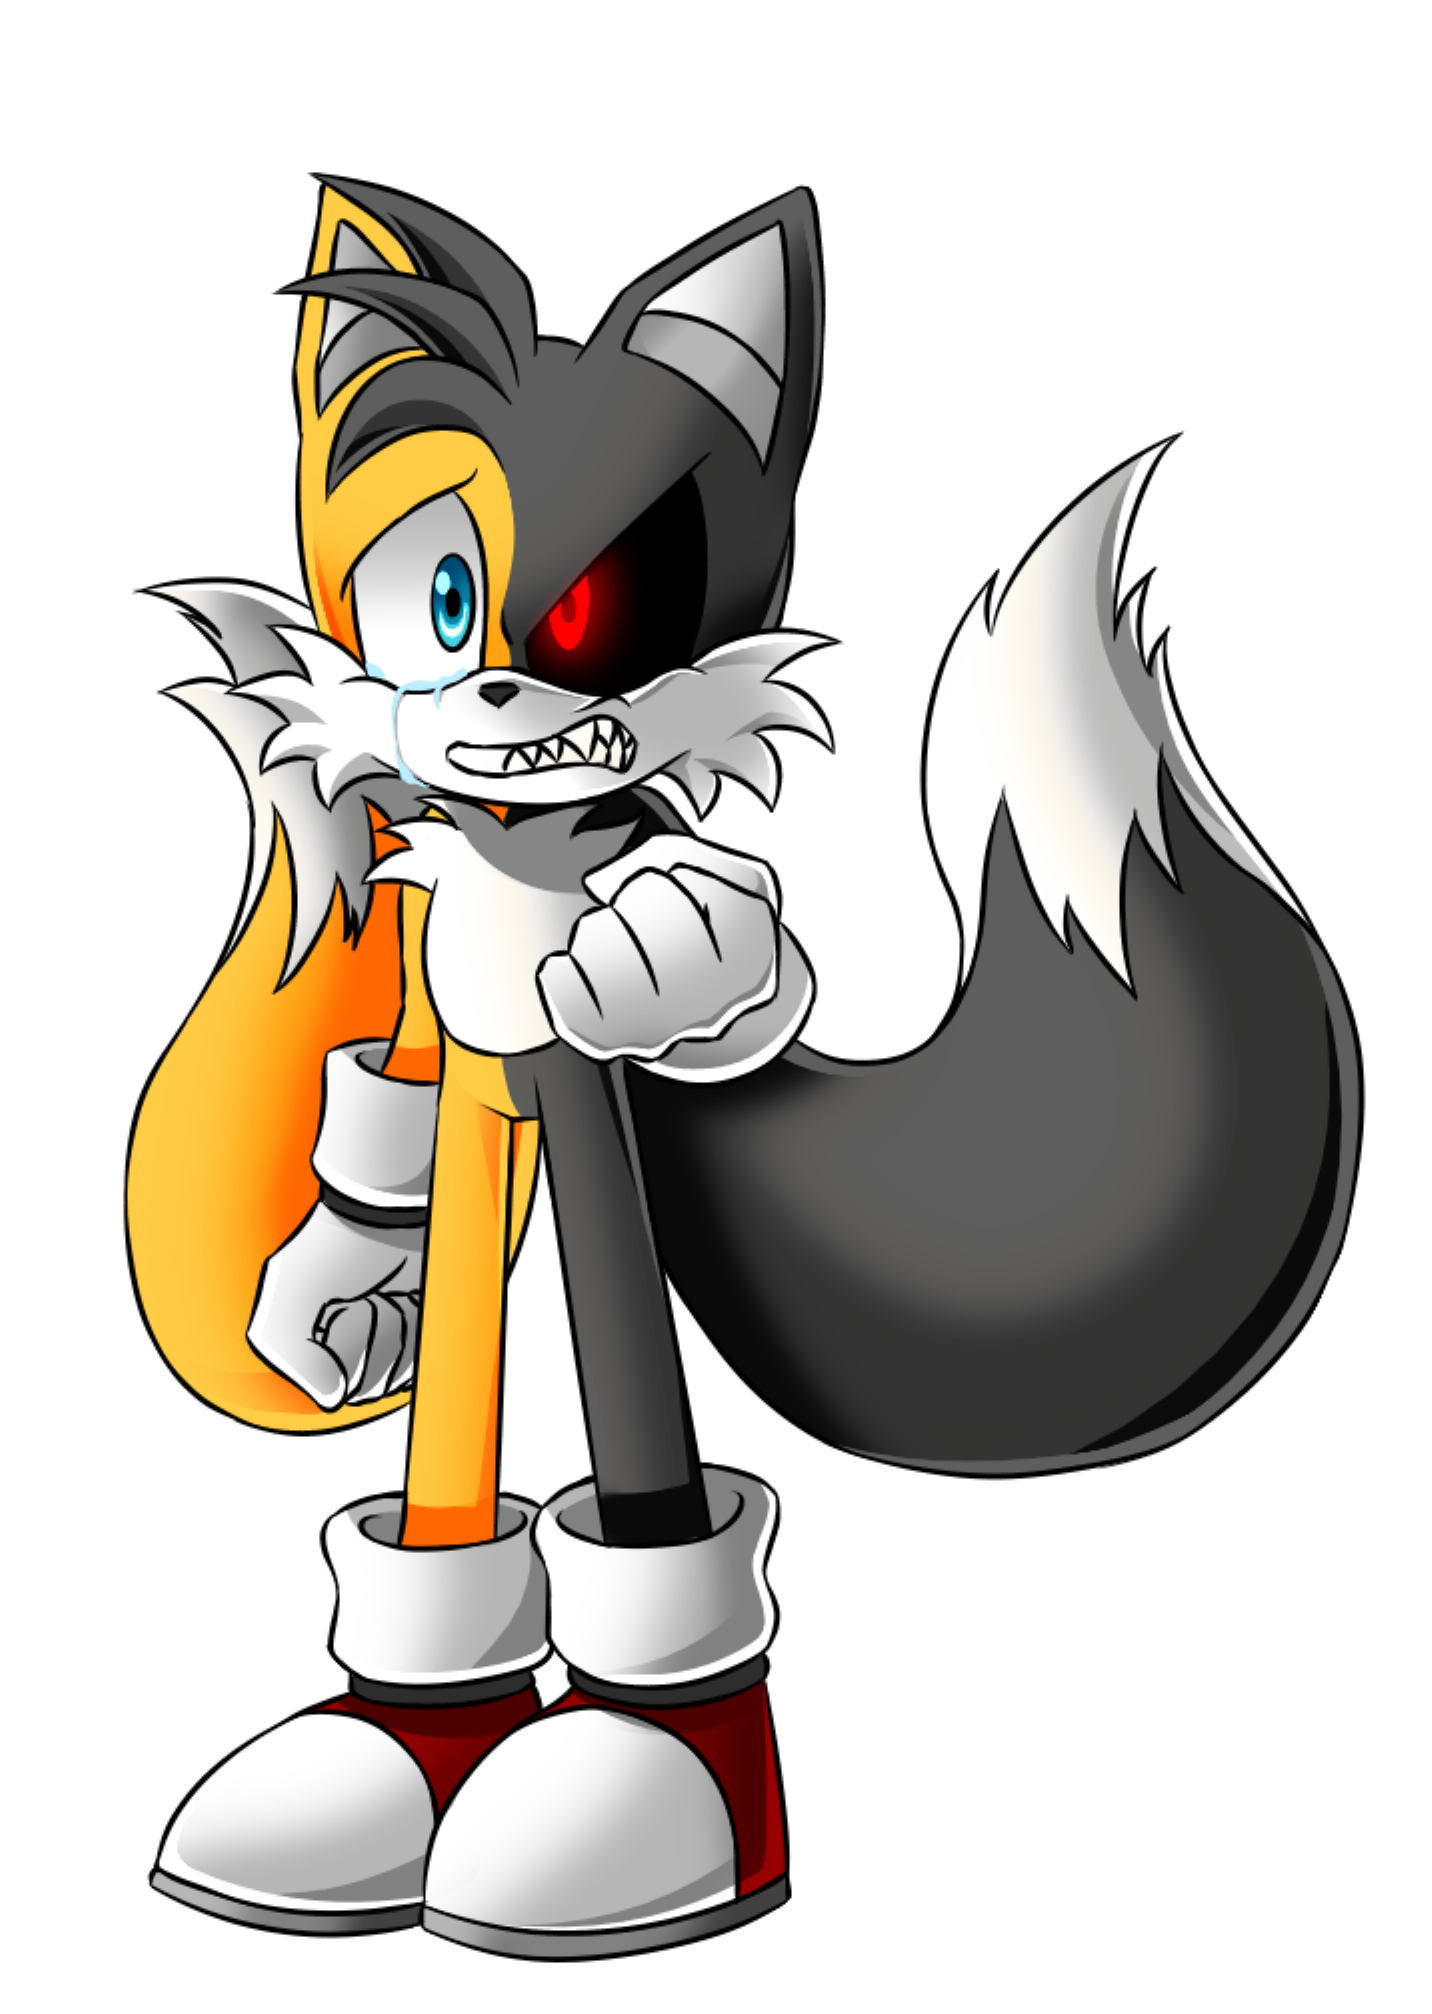 Tails.exe - Tails.exe updated their profile picture.